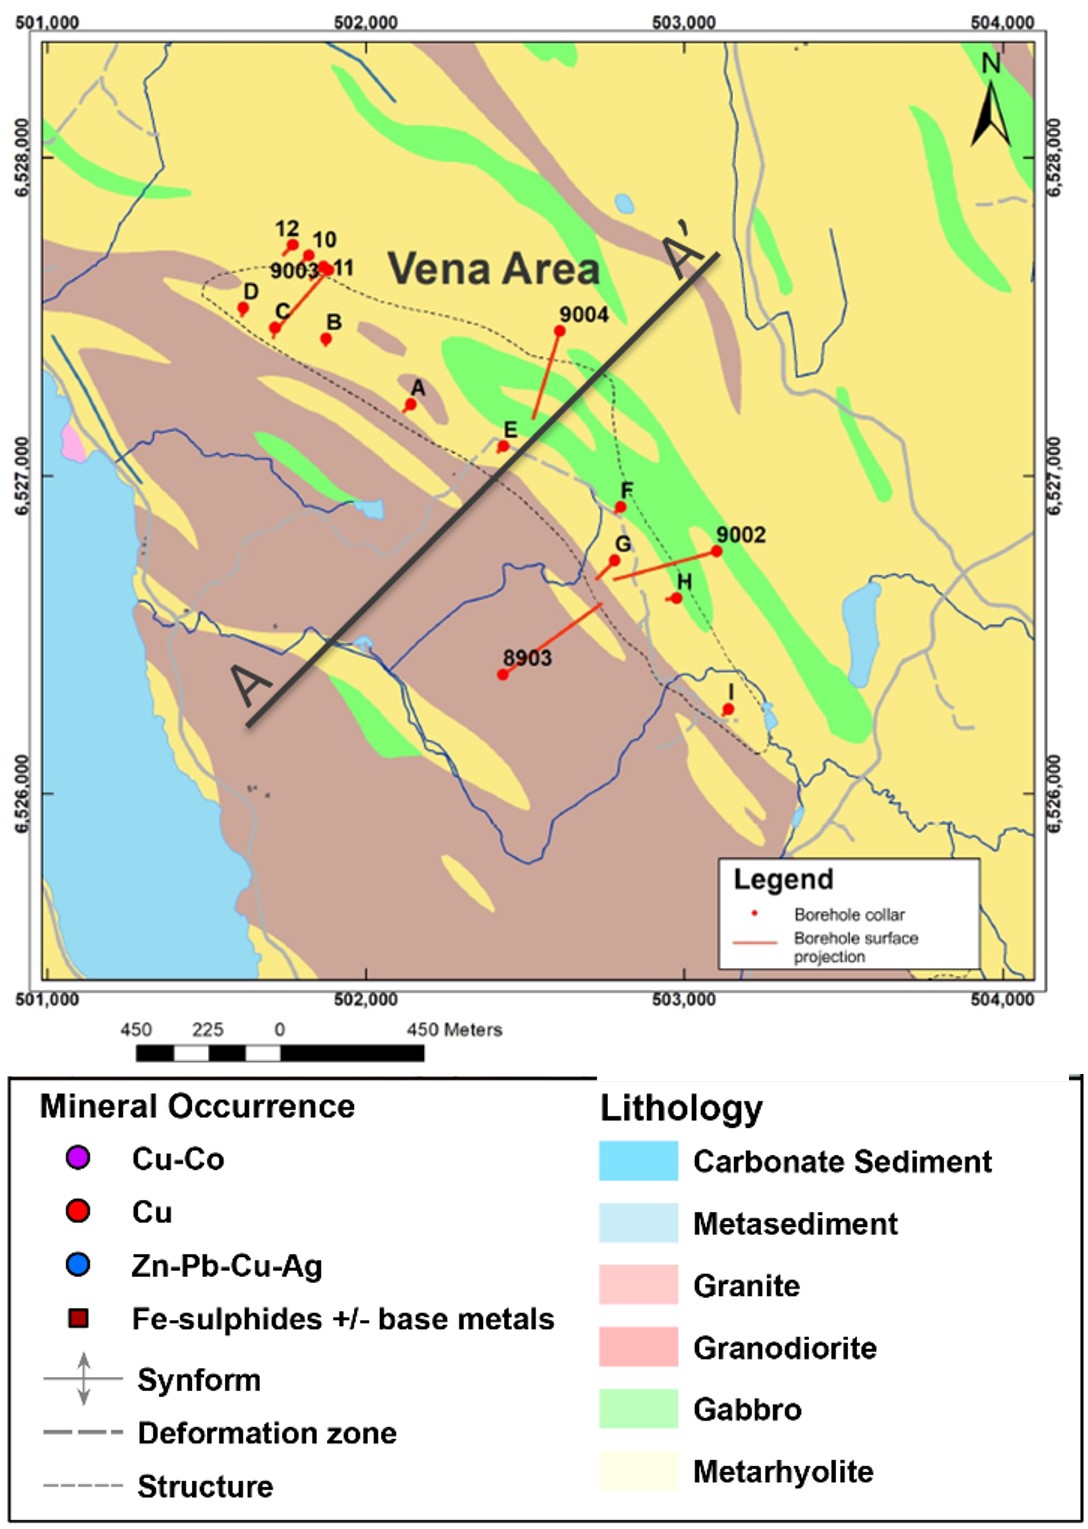 Vena project geology and minerals occurrences